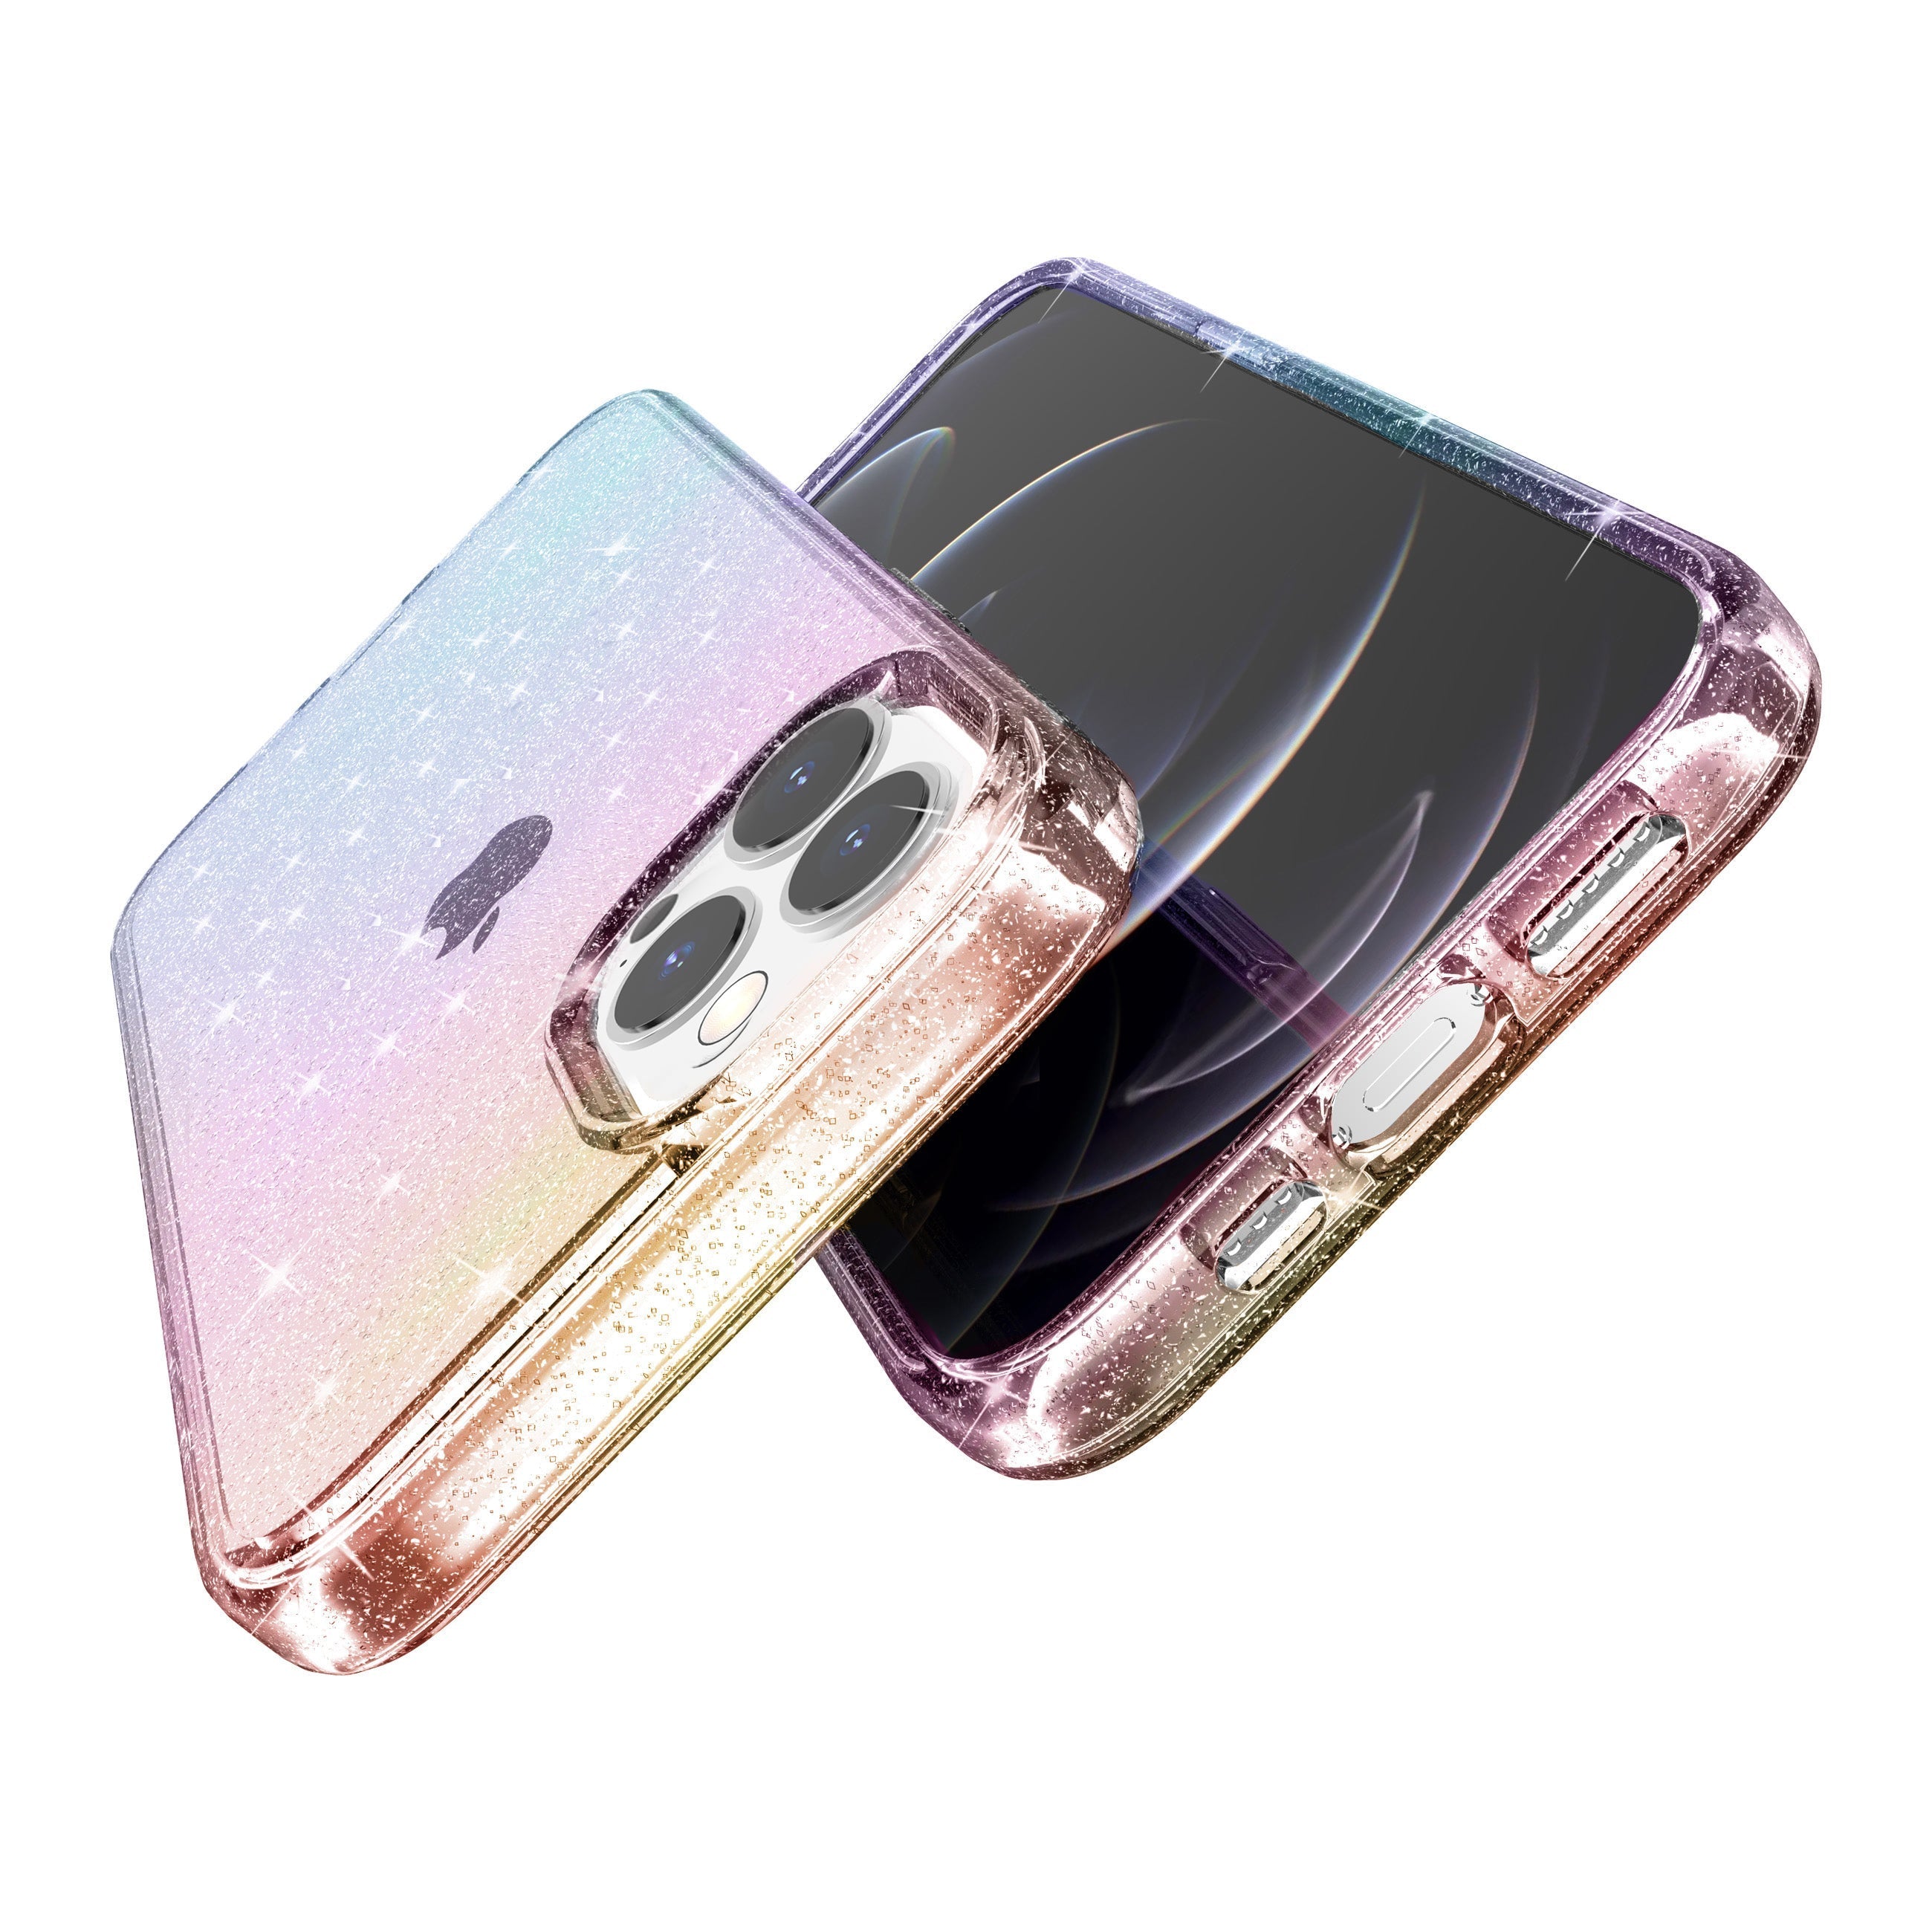 iPhone 14 Pro Max gradient shiny transparency Case